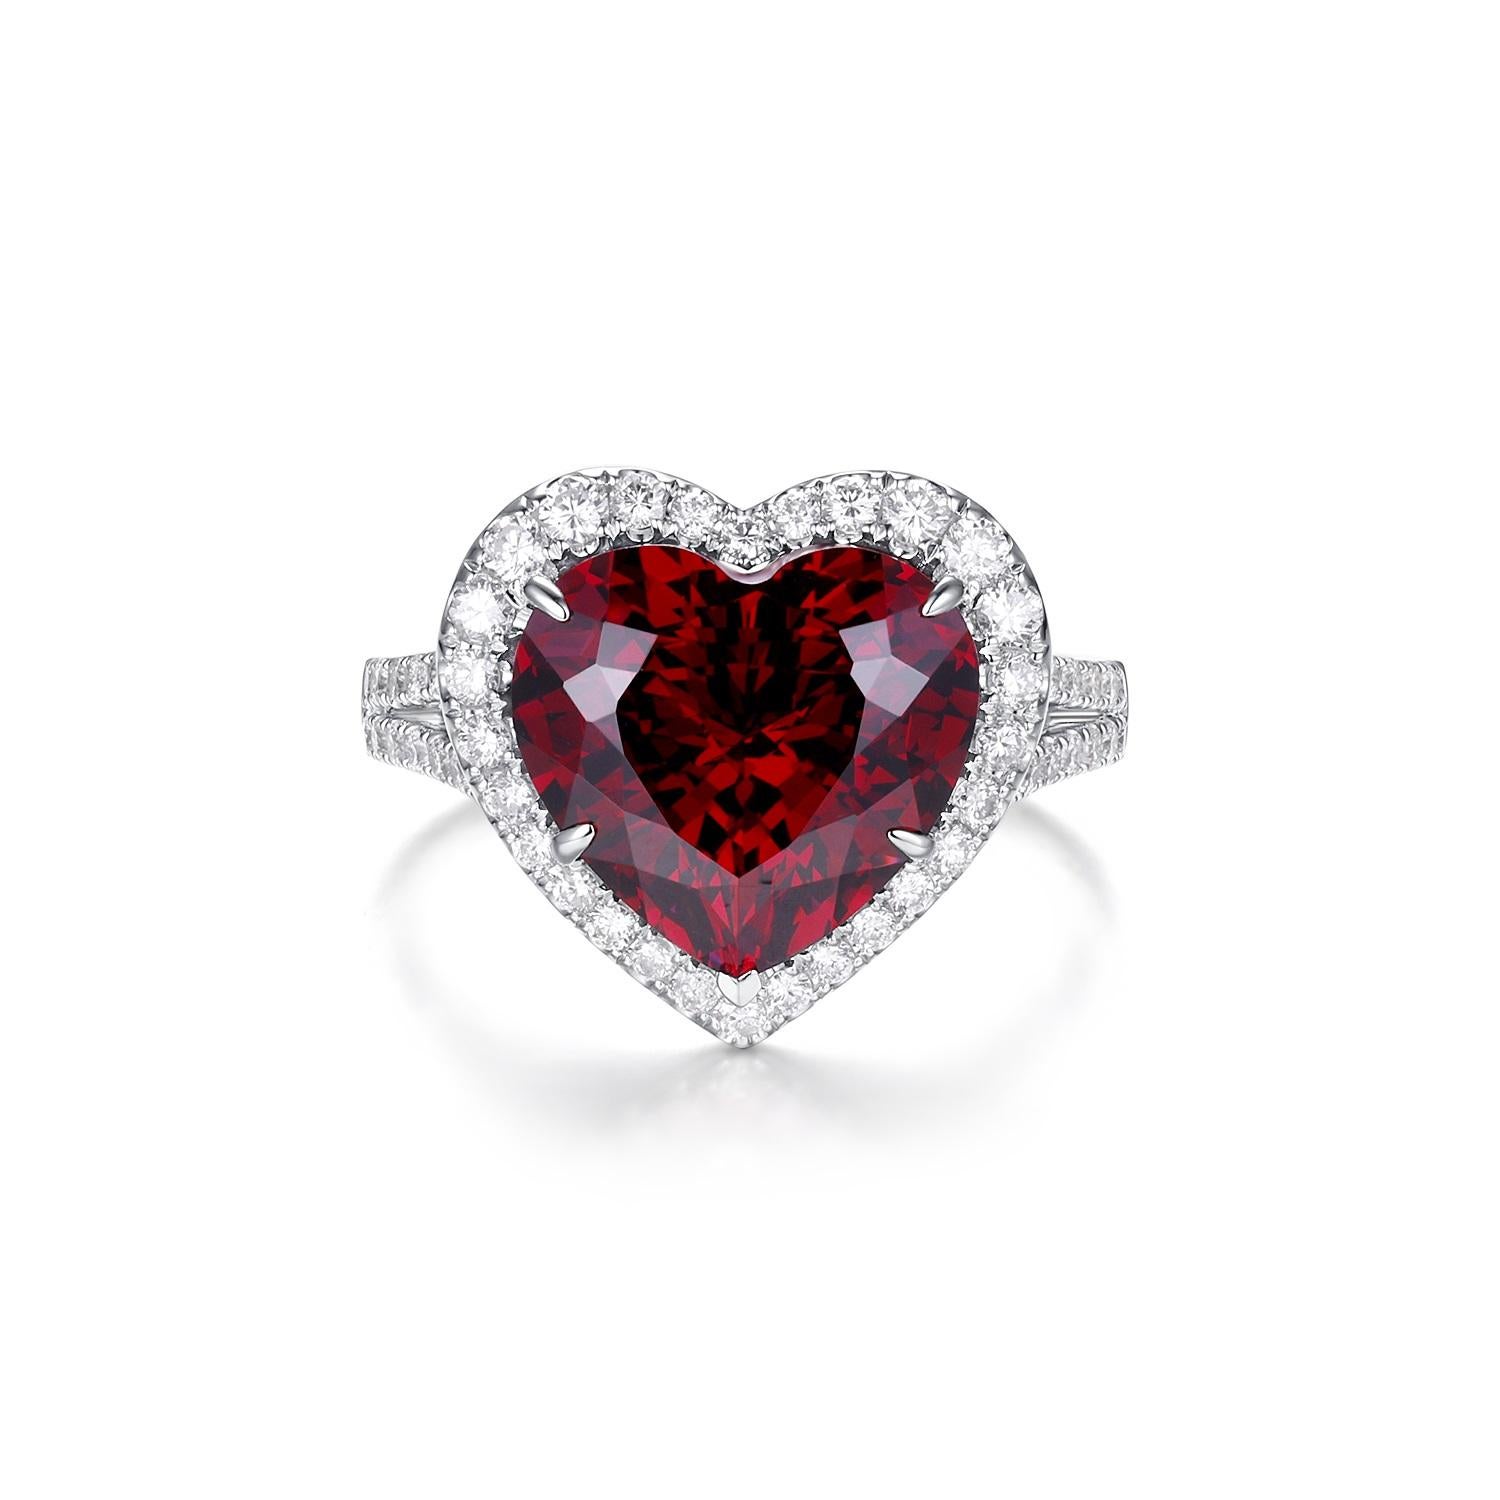 Contemporary GIA Certified 7.37 Carat Heart Garnet and Diamond Ring in 18K White Gold For Sale